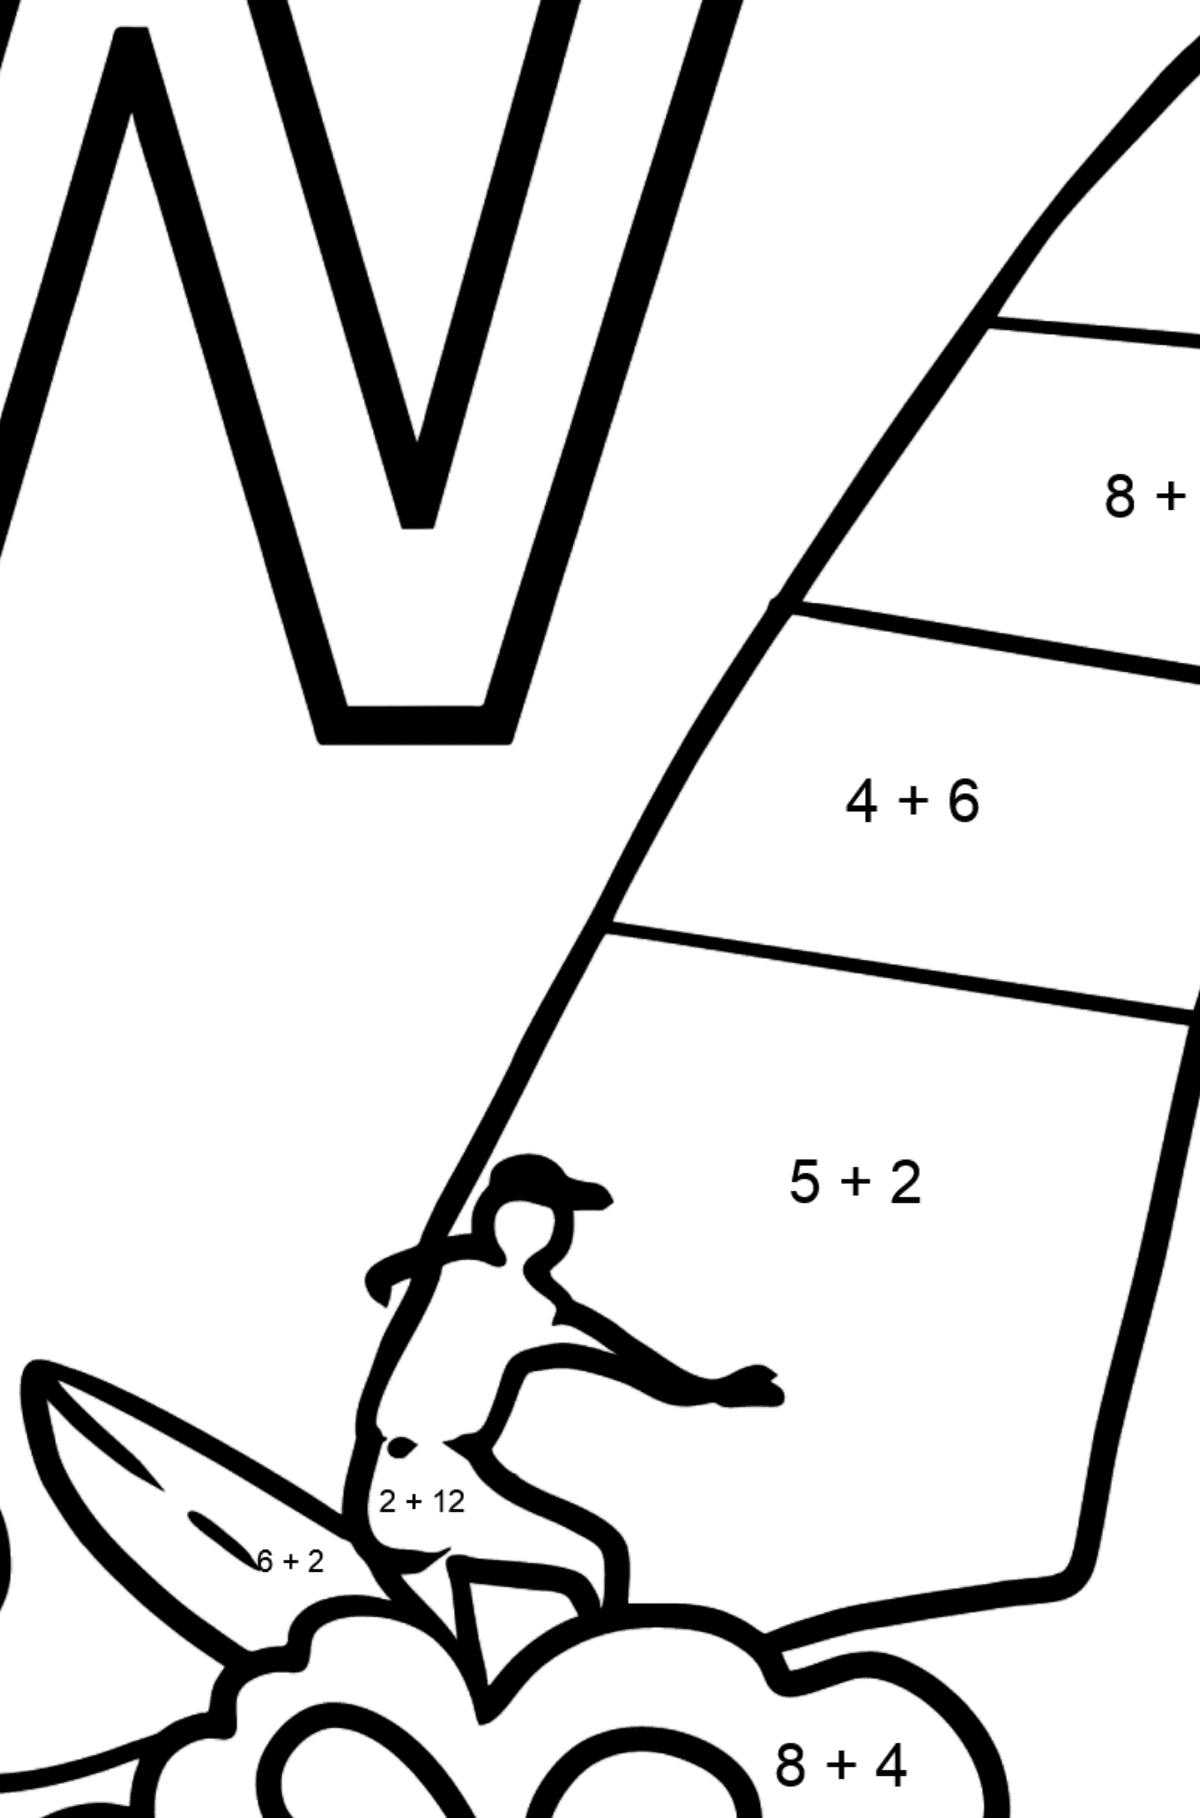 Portuguese Letter W coloring pages - WINDSURF - Math Coloring - Addition for Kids